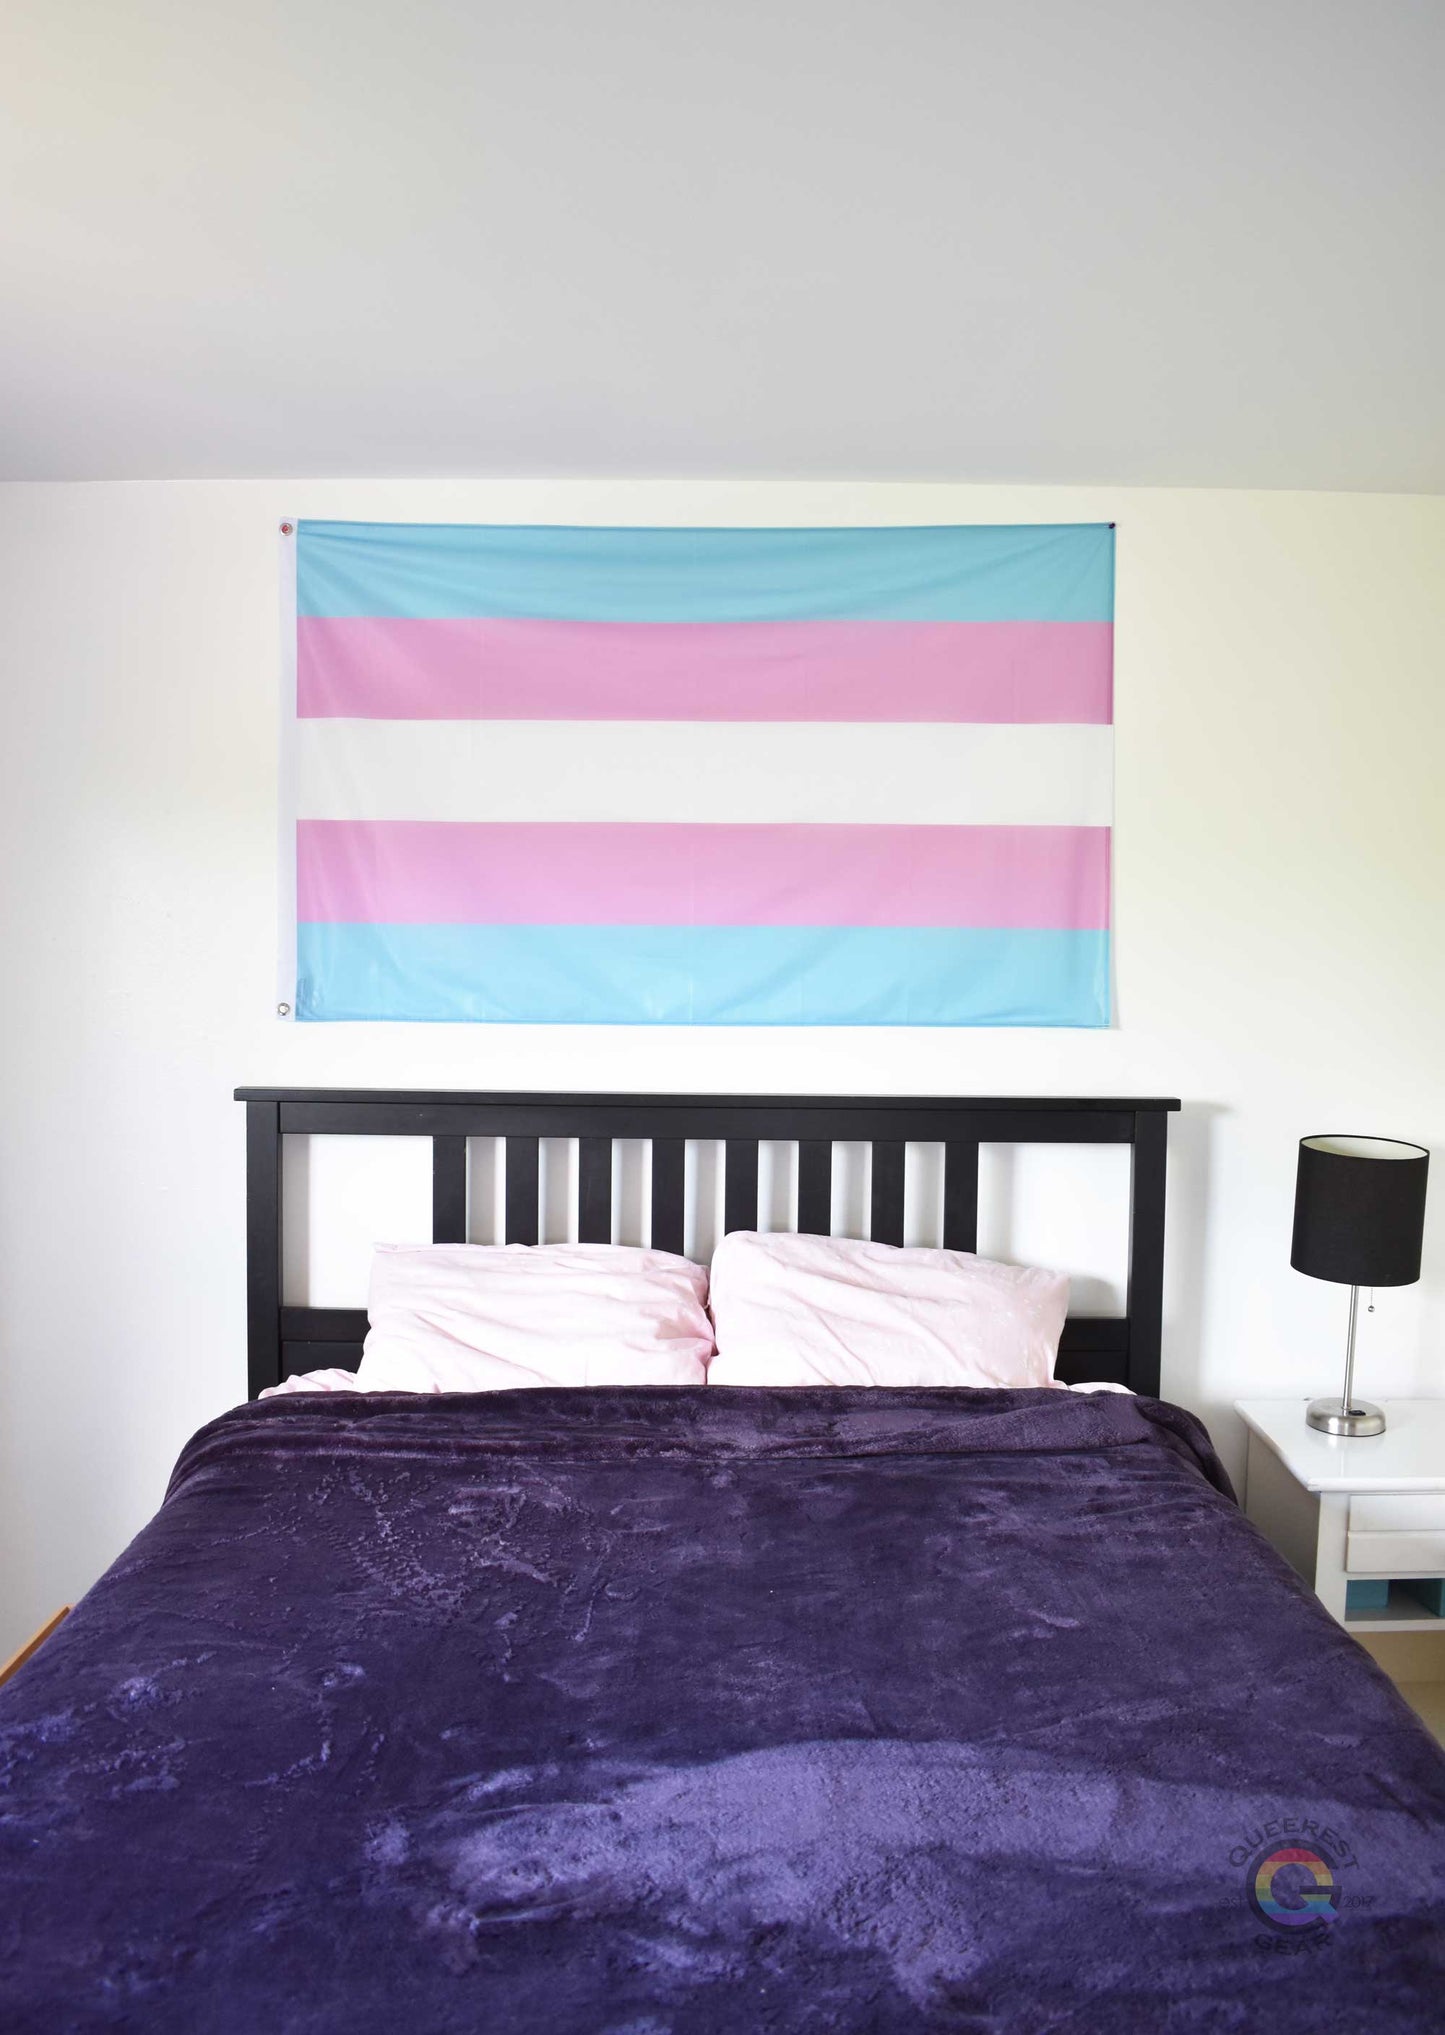 3’x5’ transgender pride flag hanging horizontally on the wall of a bedroom centered above a bed with a purple blanket